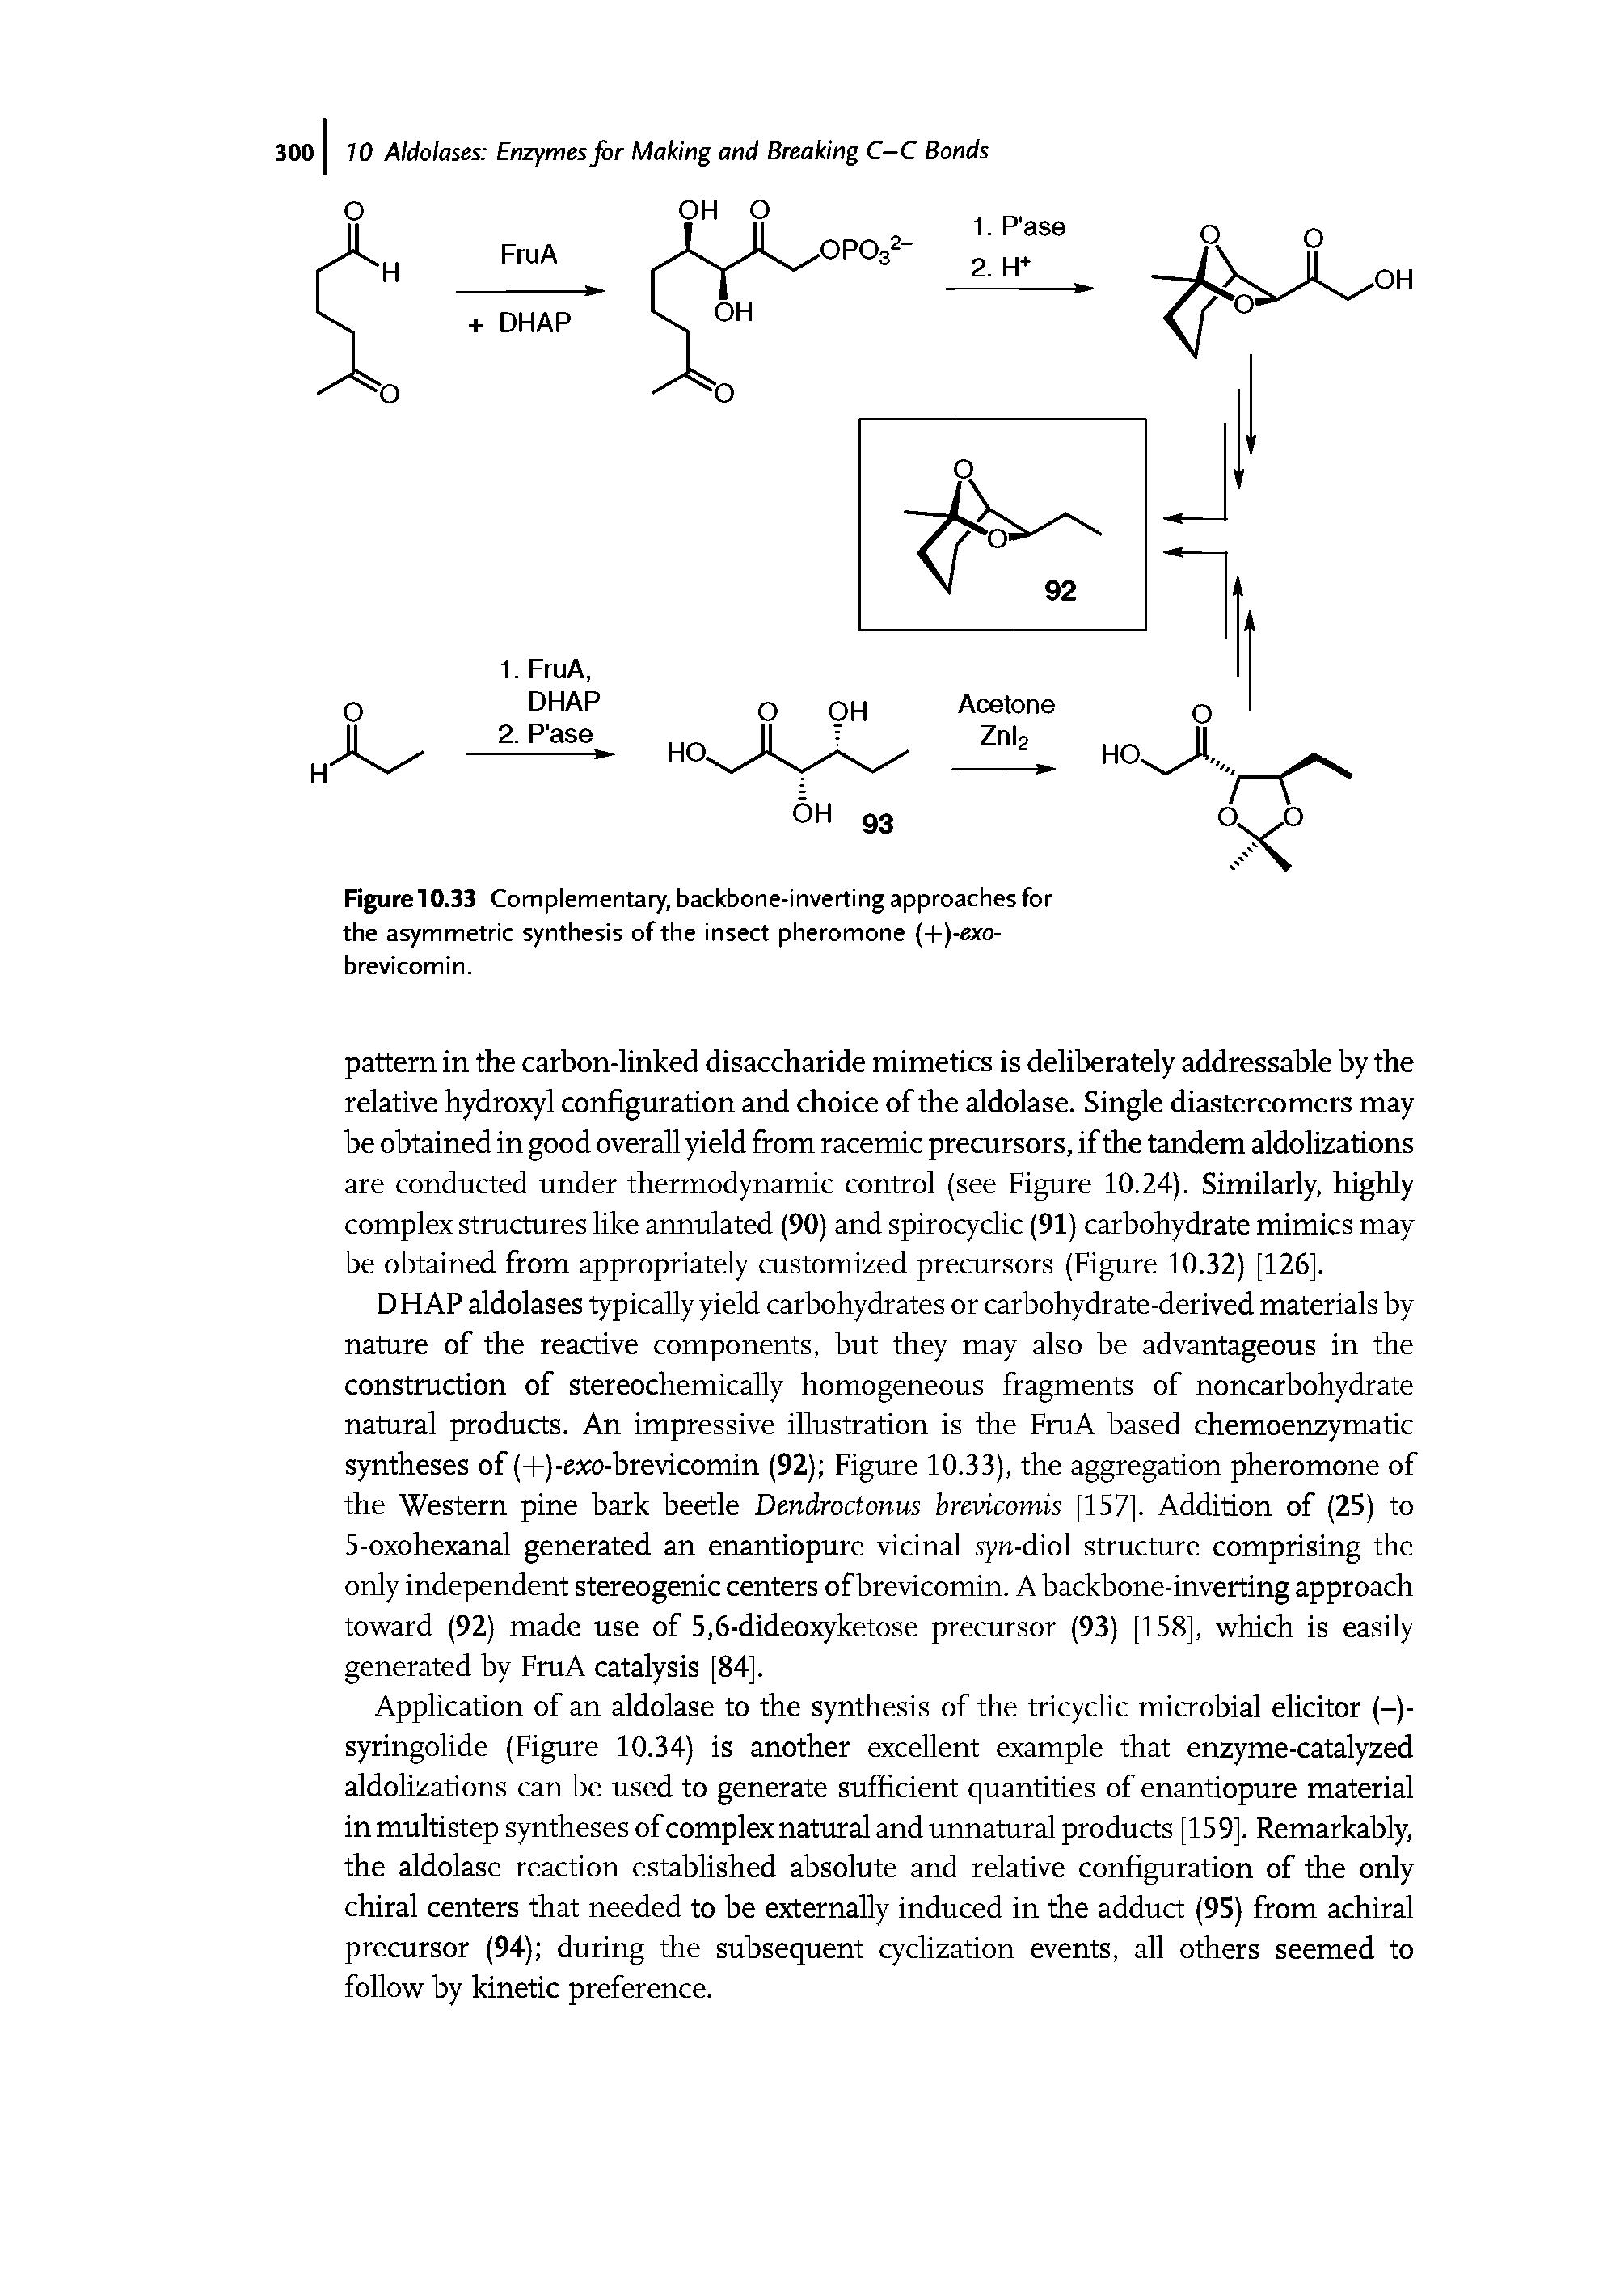 Figure 10.33 Complementary, backbone-inverting approaches for the asymmetric synthesis of the insect pheromone (-l-)-exo-brevicomin.